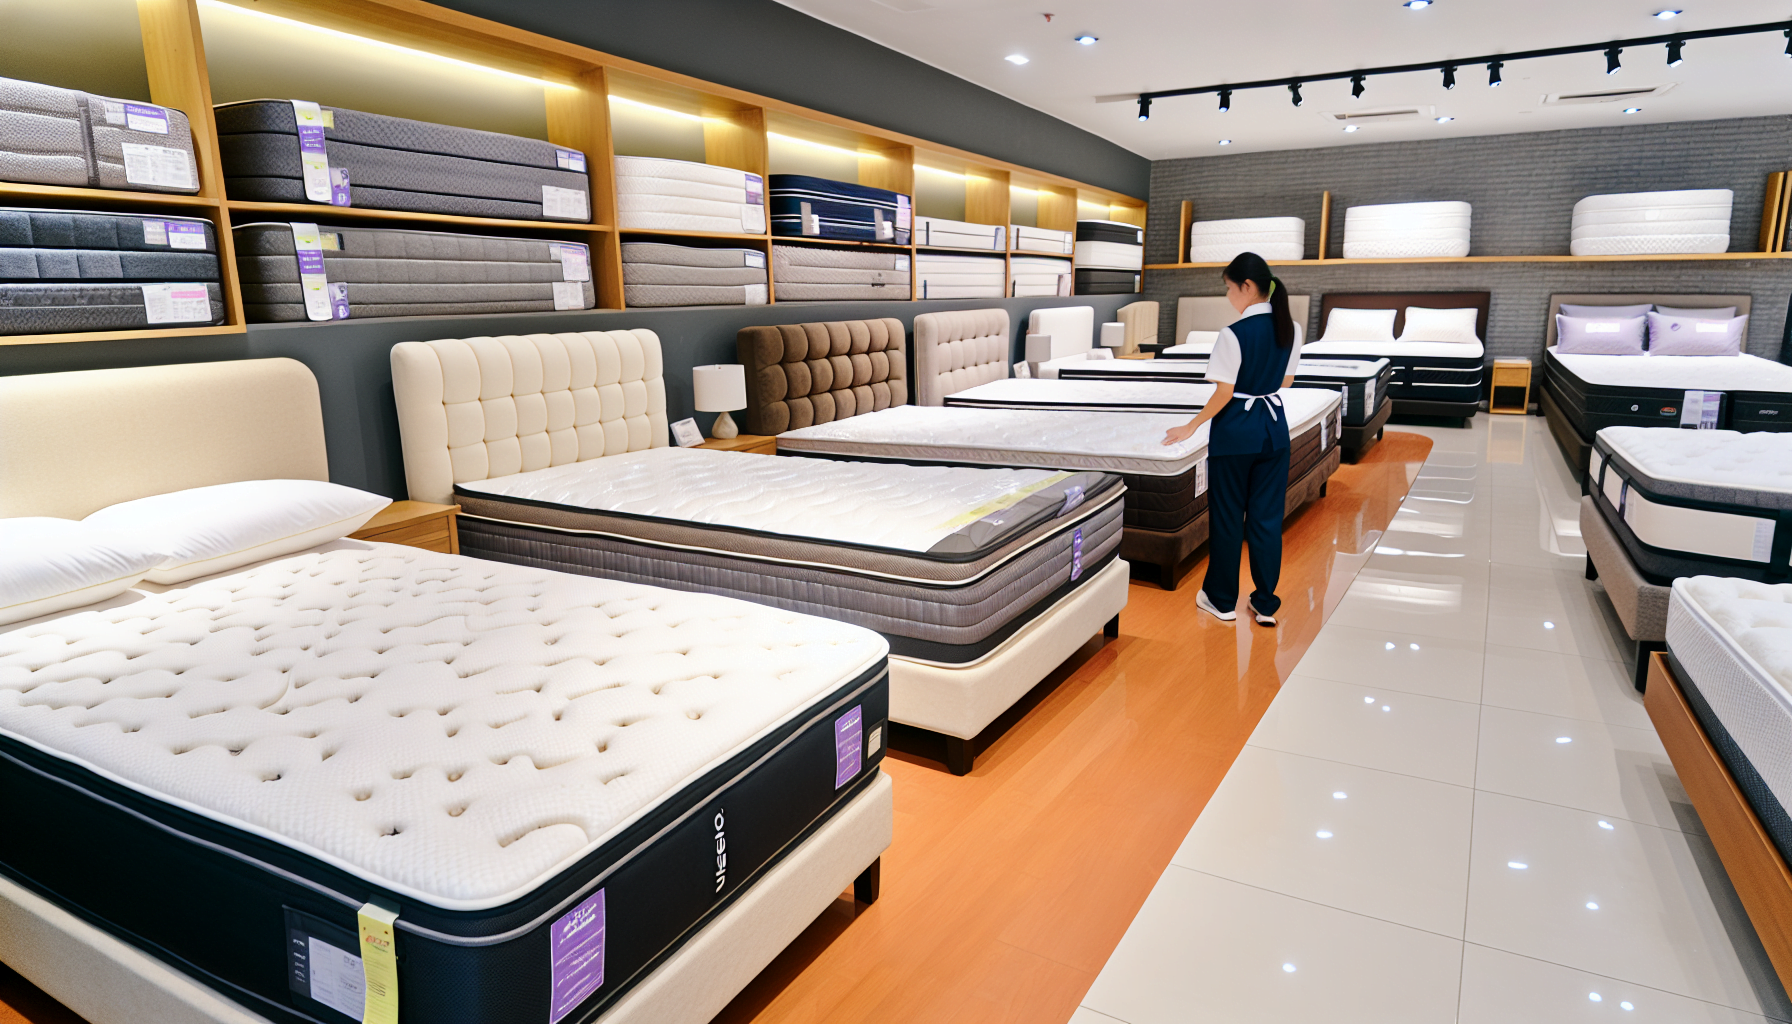 A selection of quality mattresses in Austin